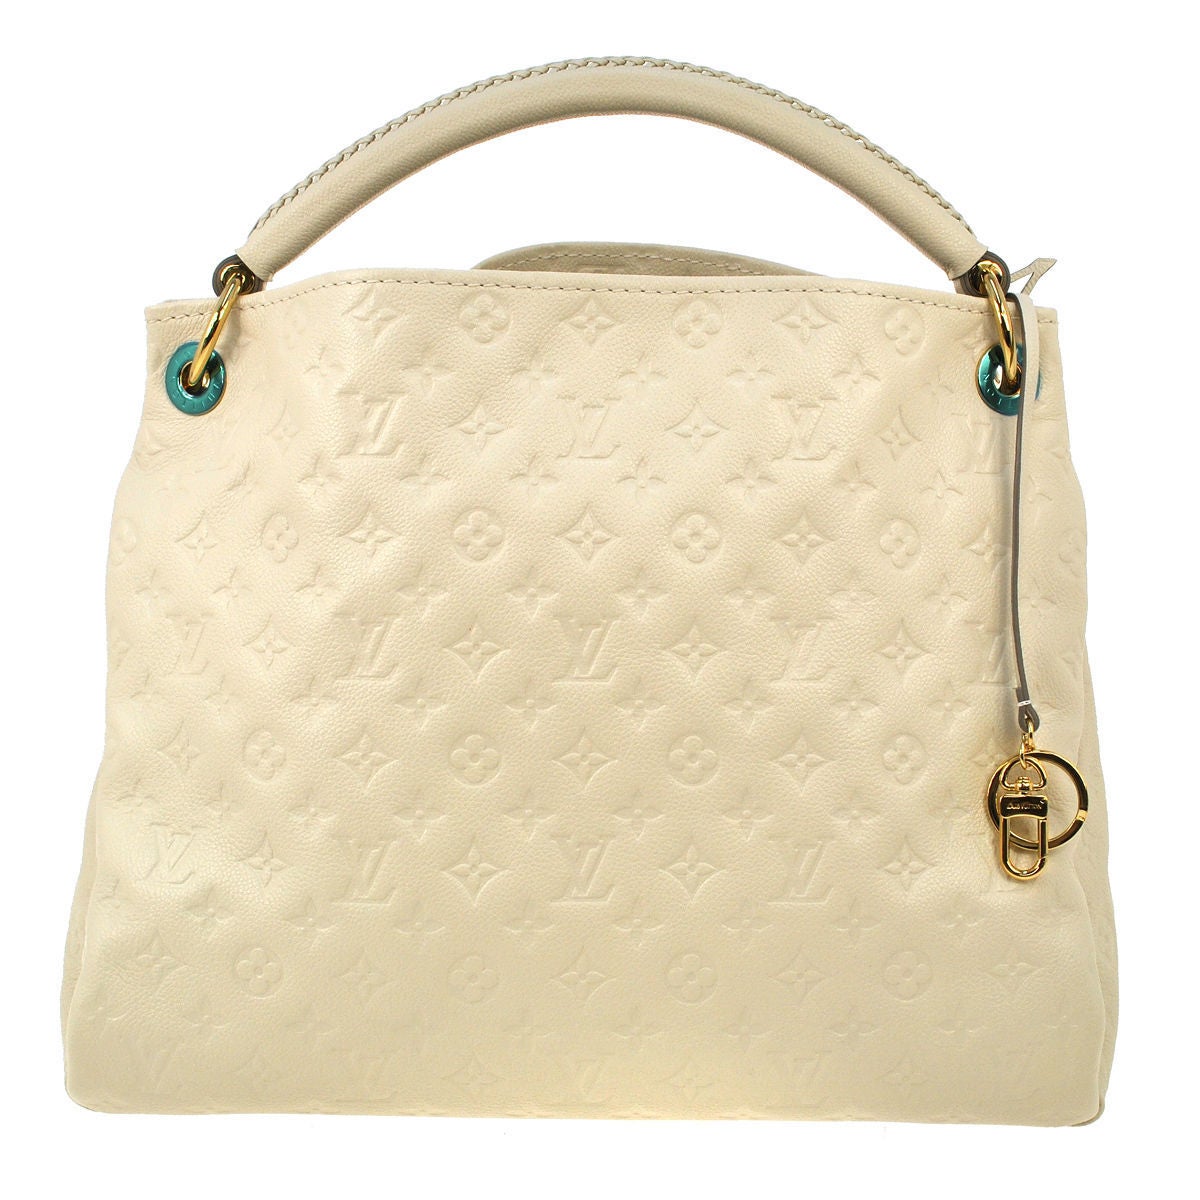 This is an authentic LOUIS VUITTON Monogram Empreinte Artsy MM in NIEGE . This stunning shoulder bag is crafted of a large quantity of Louis Vuitton monogram embossed leather in White. The bag features a thick looping leather shoulder strap and